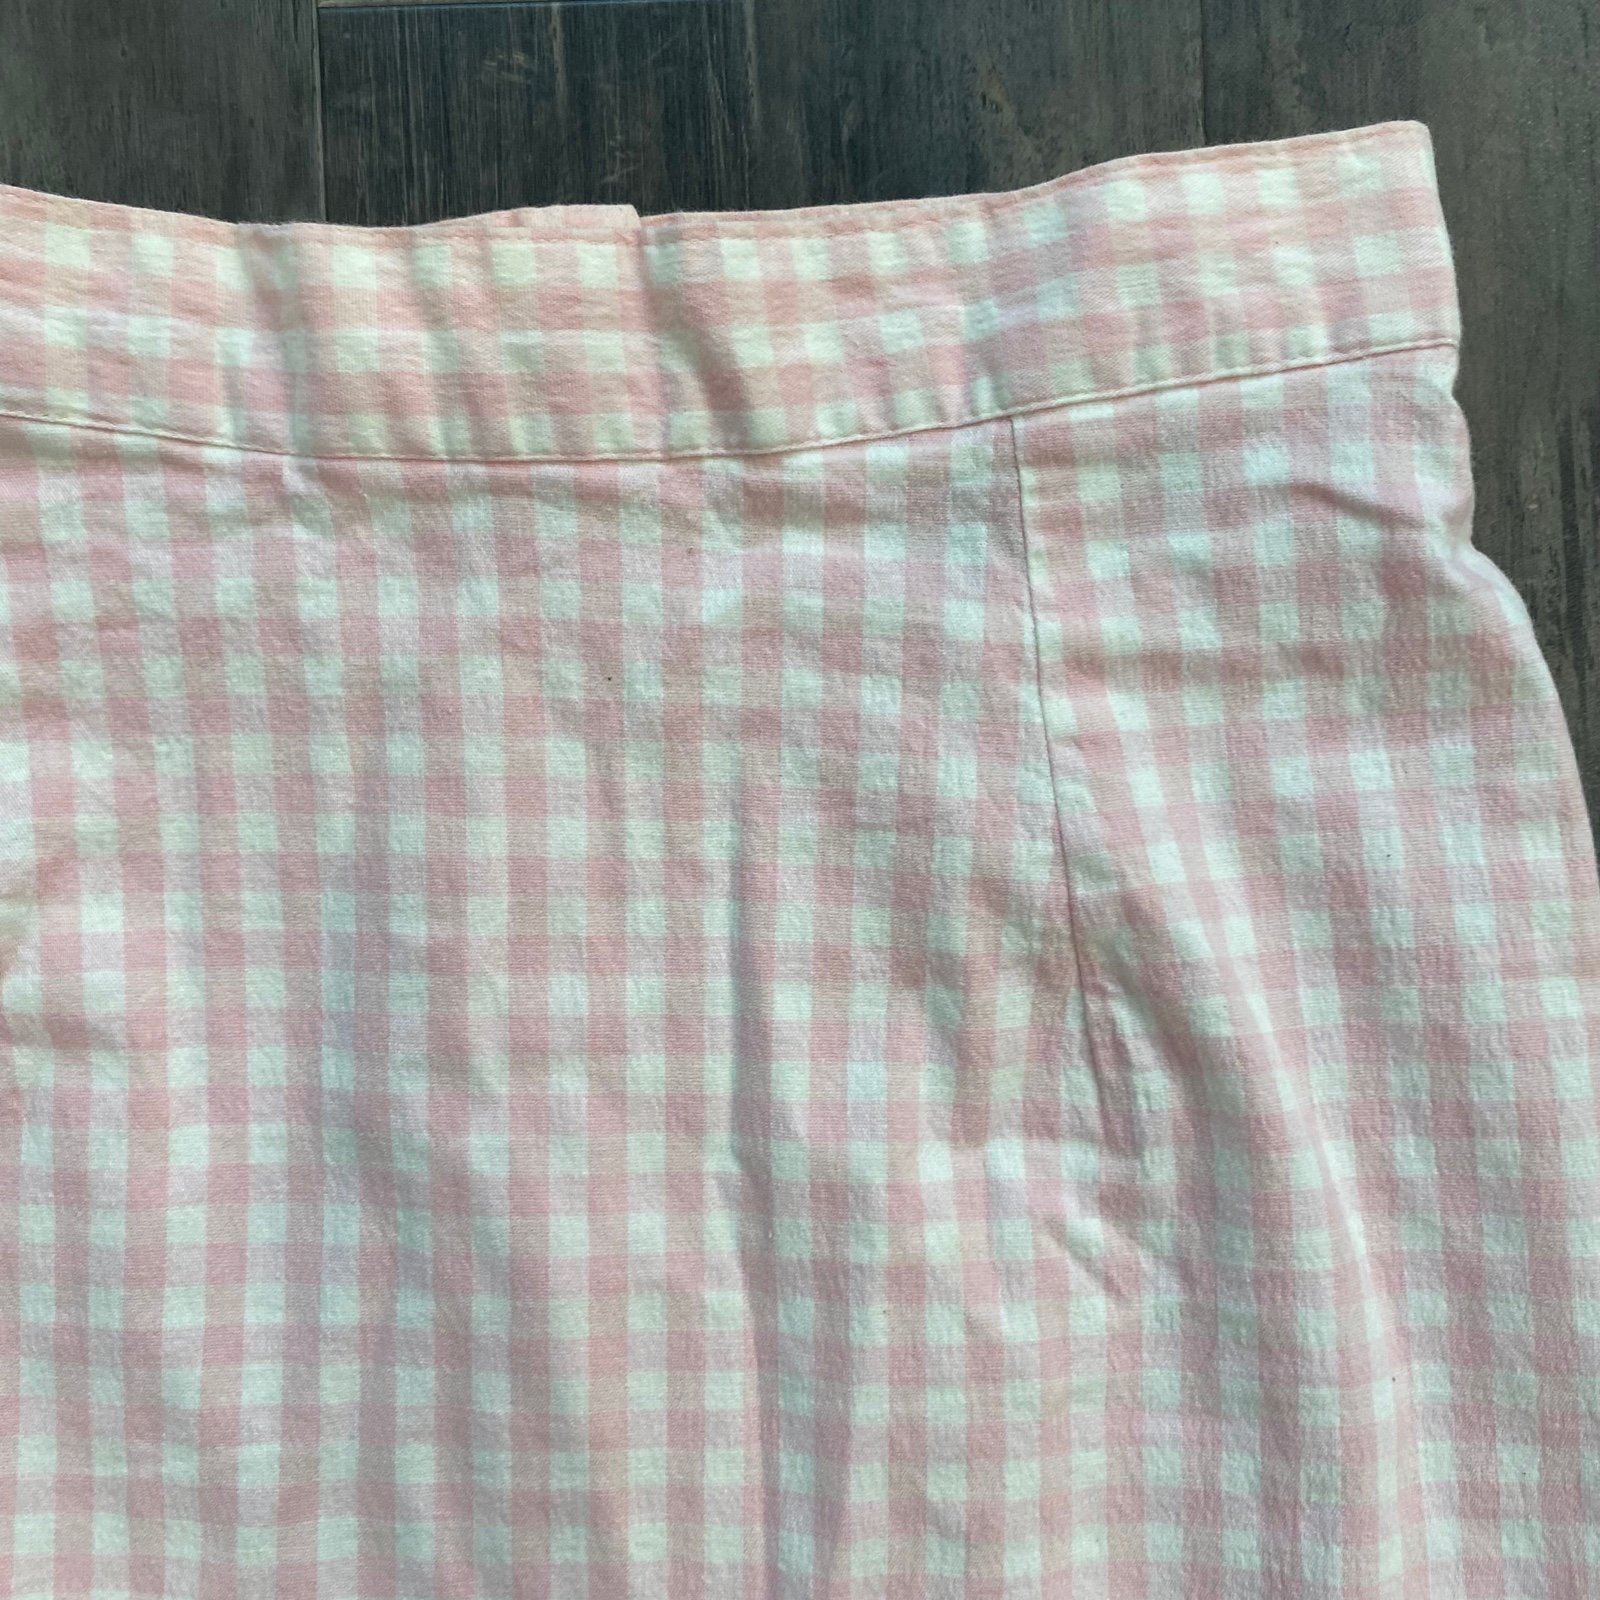 Gorgeous Vintage 90s Tracy Evans Pink Gingham Pencil Skirt hyjQyfcTU Buying Cheap